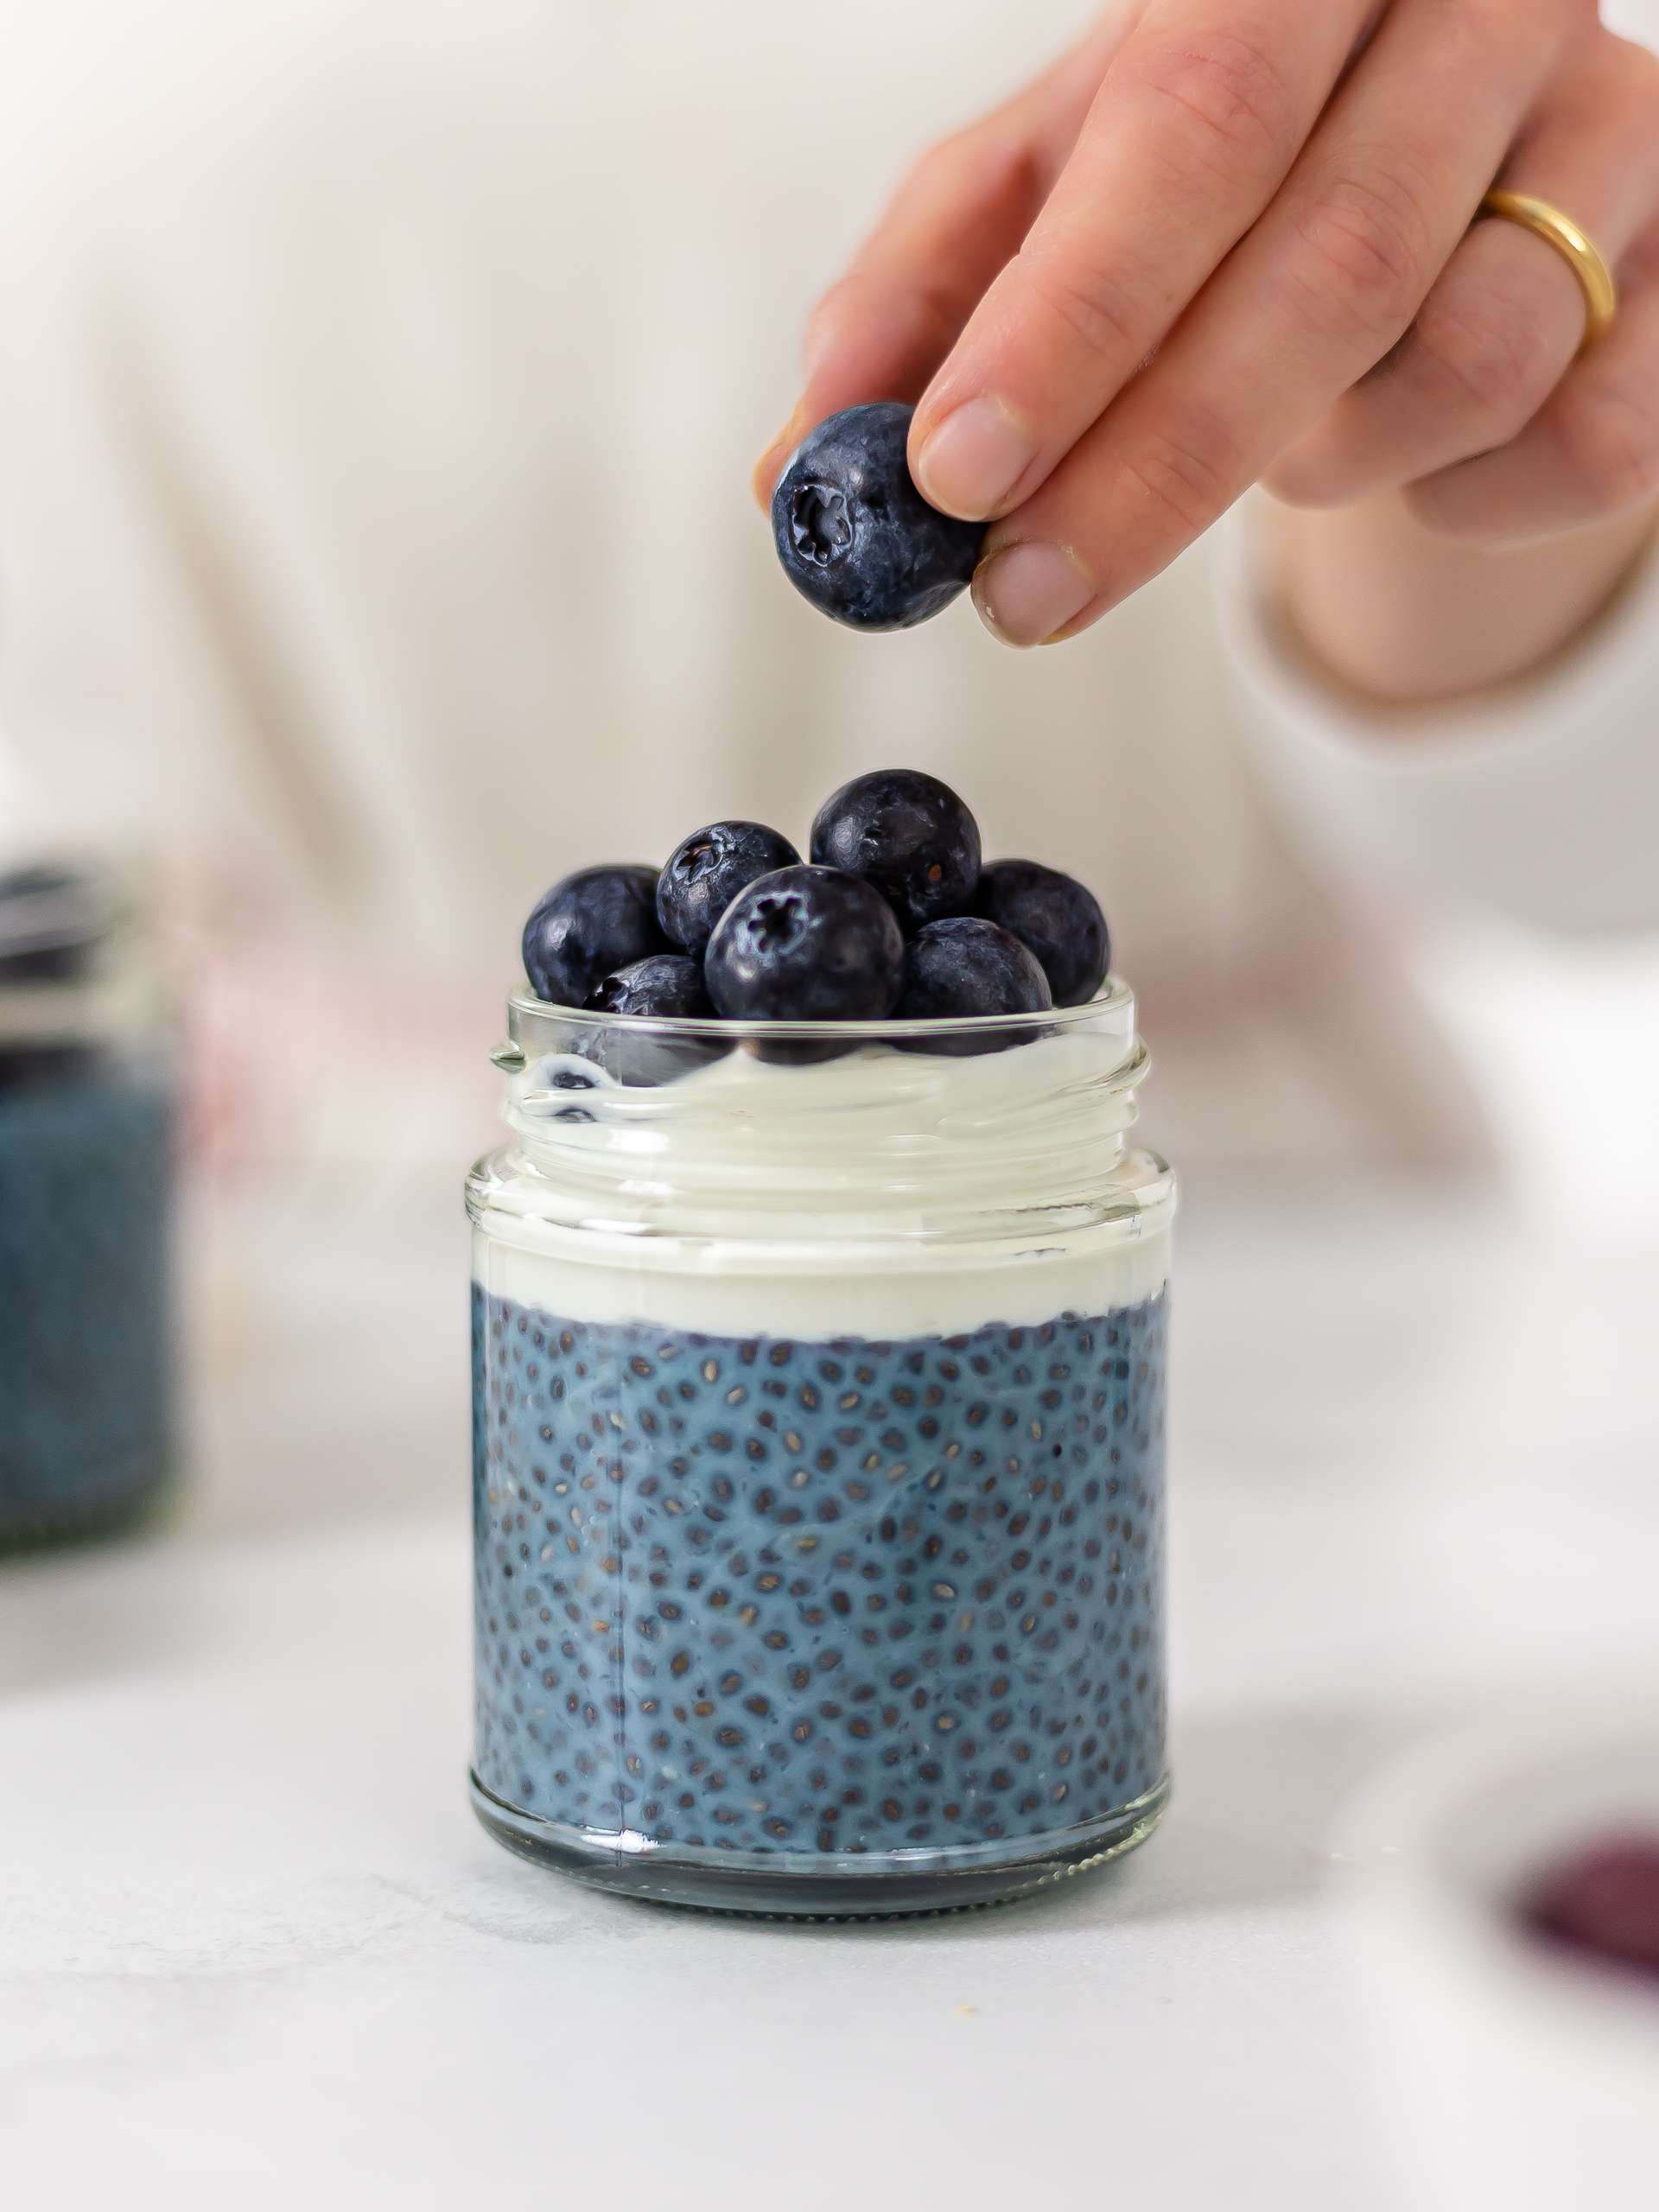 butterfly pea pudding topped with yogurt and berries